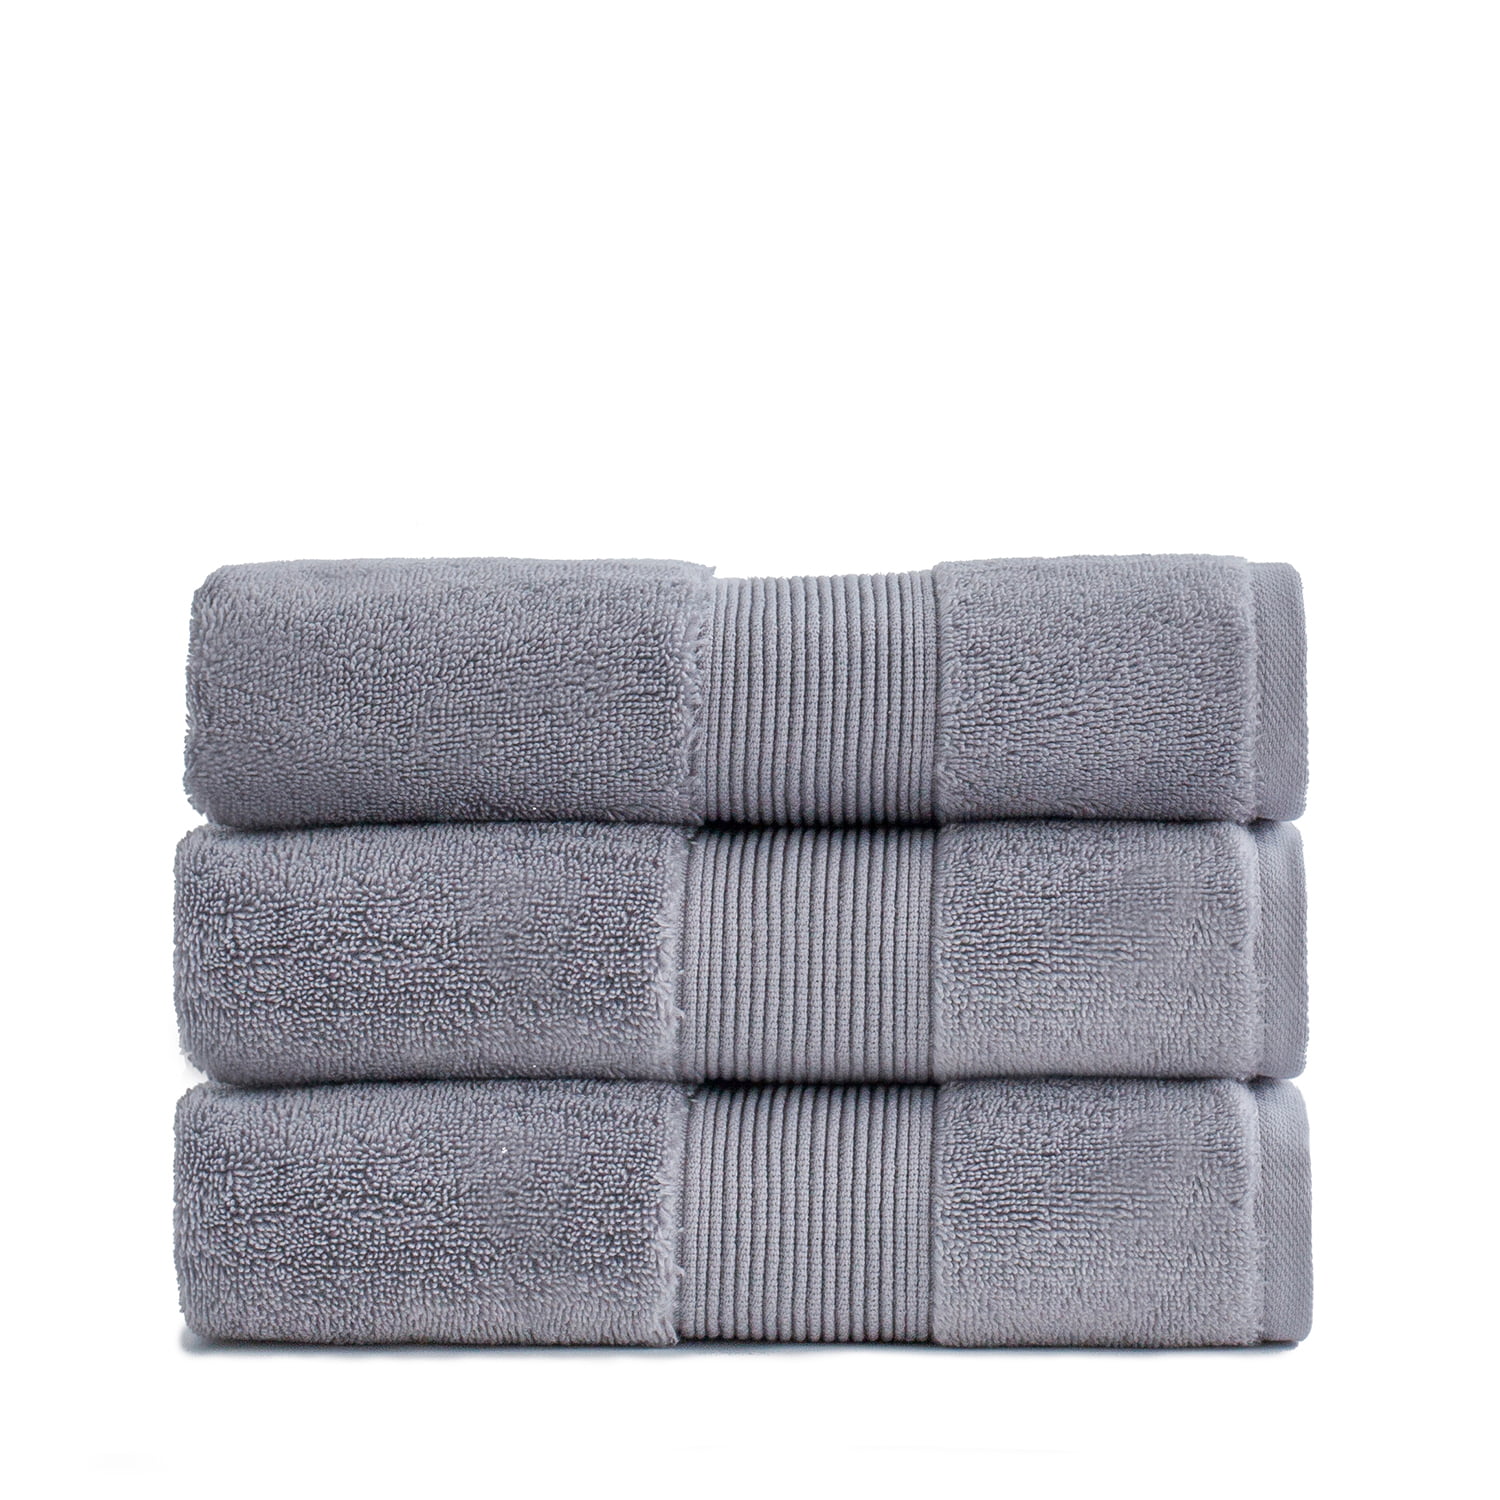 Details about   Miracle Cotton and Silver Ion Antimicrobial Premium Plush Bath Towel Stone 